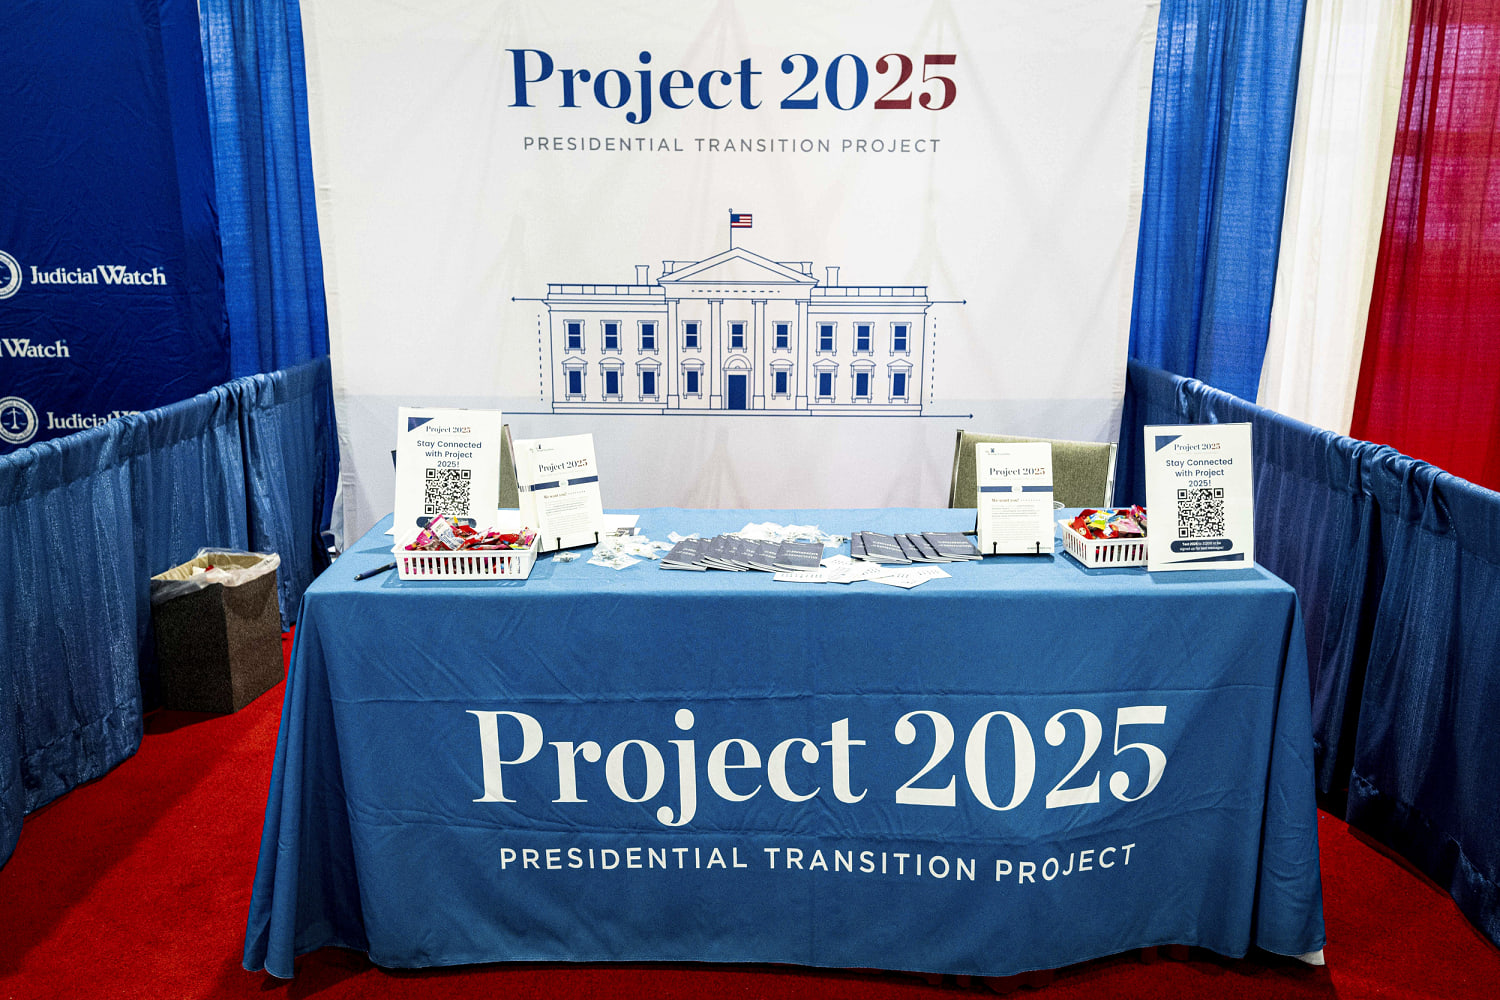 Reports of Project 2025’s demise have been greatly exaggerated